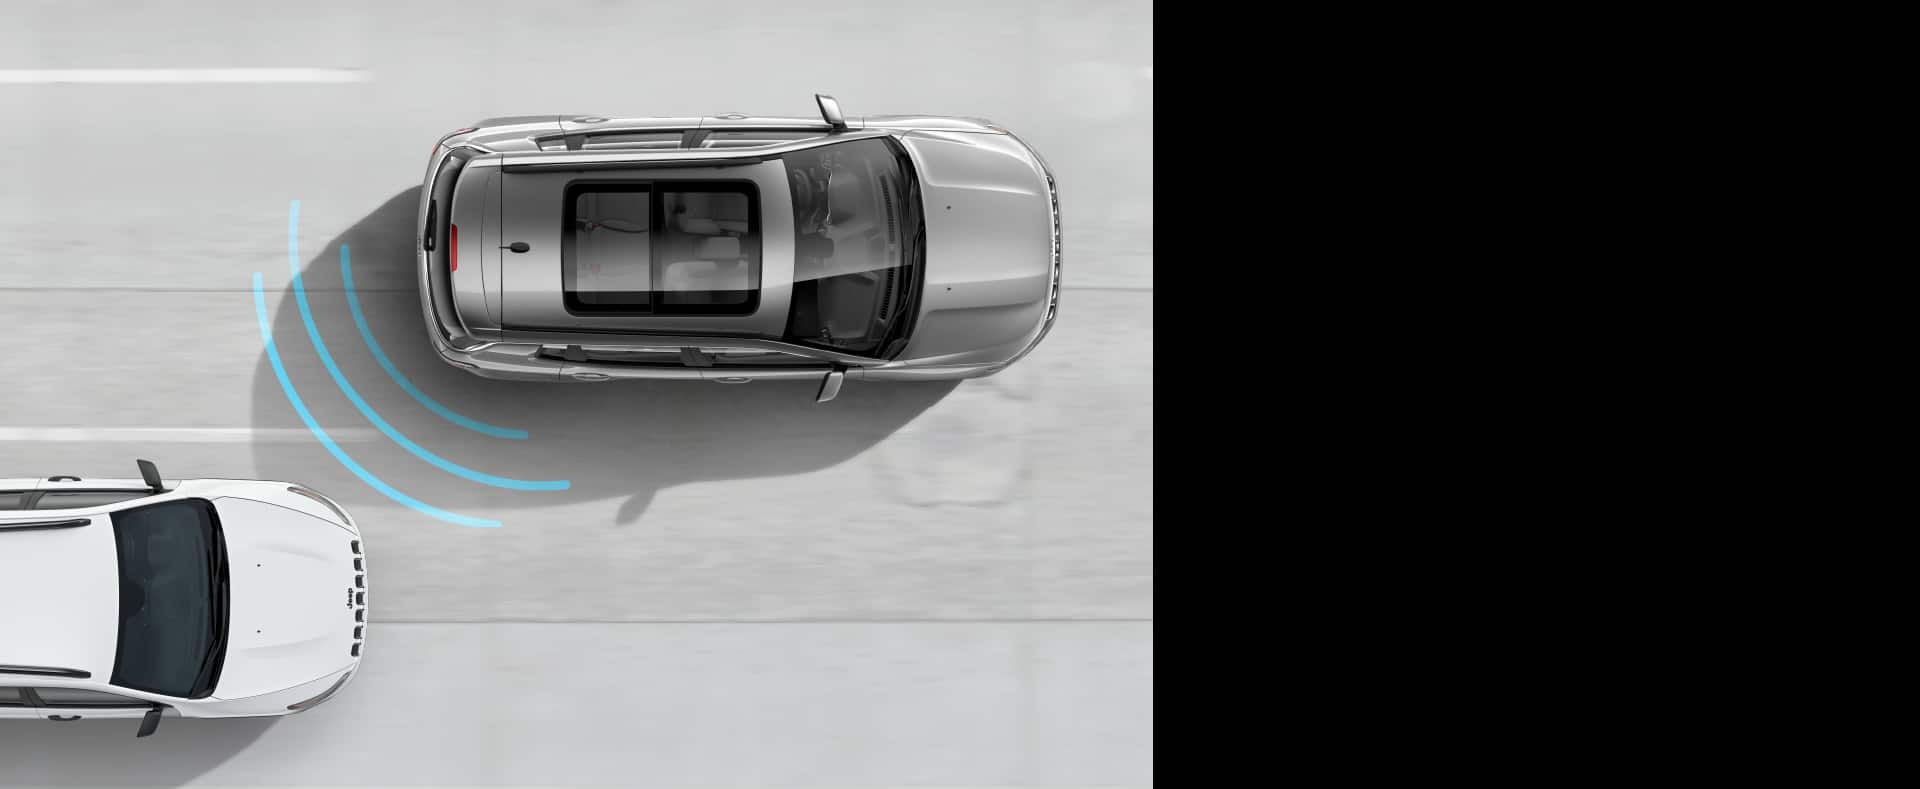 Illustration of sensors emanating from the rear of 2021 Jeep Compass as another vehicle approaches it from behind.